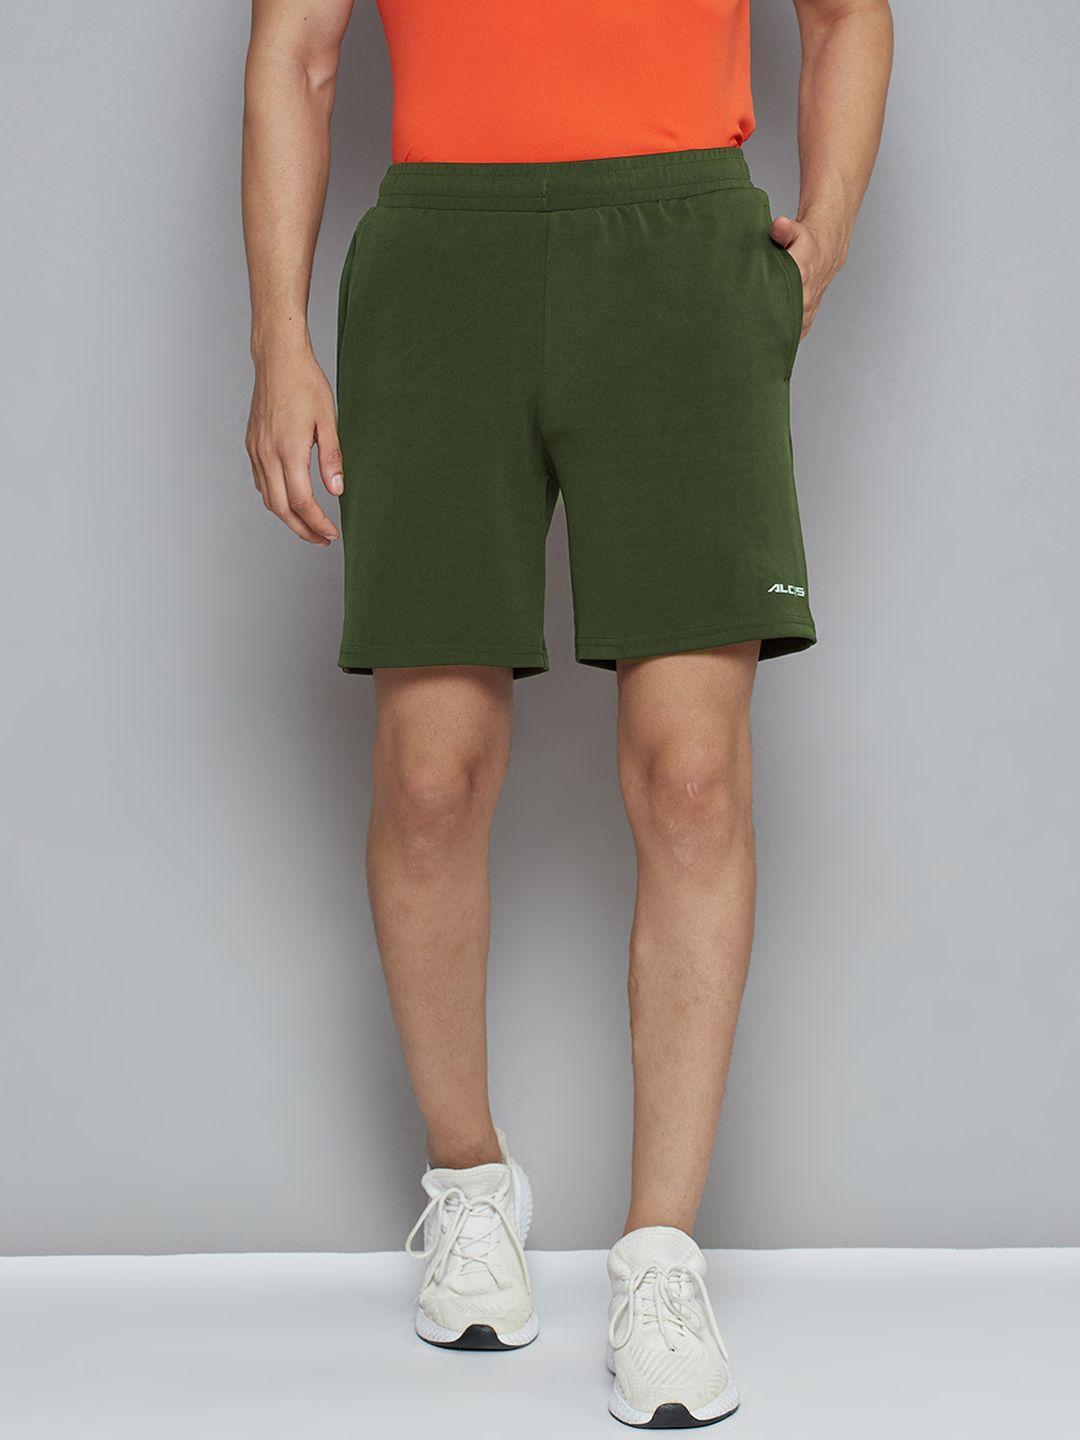 alcis-men-olive-green-solid-slim-fit-sports-shorts